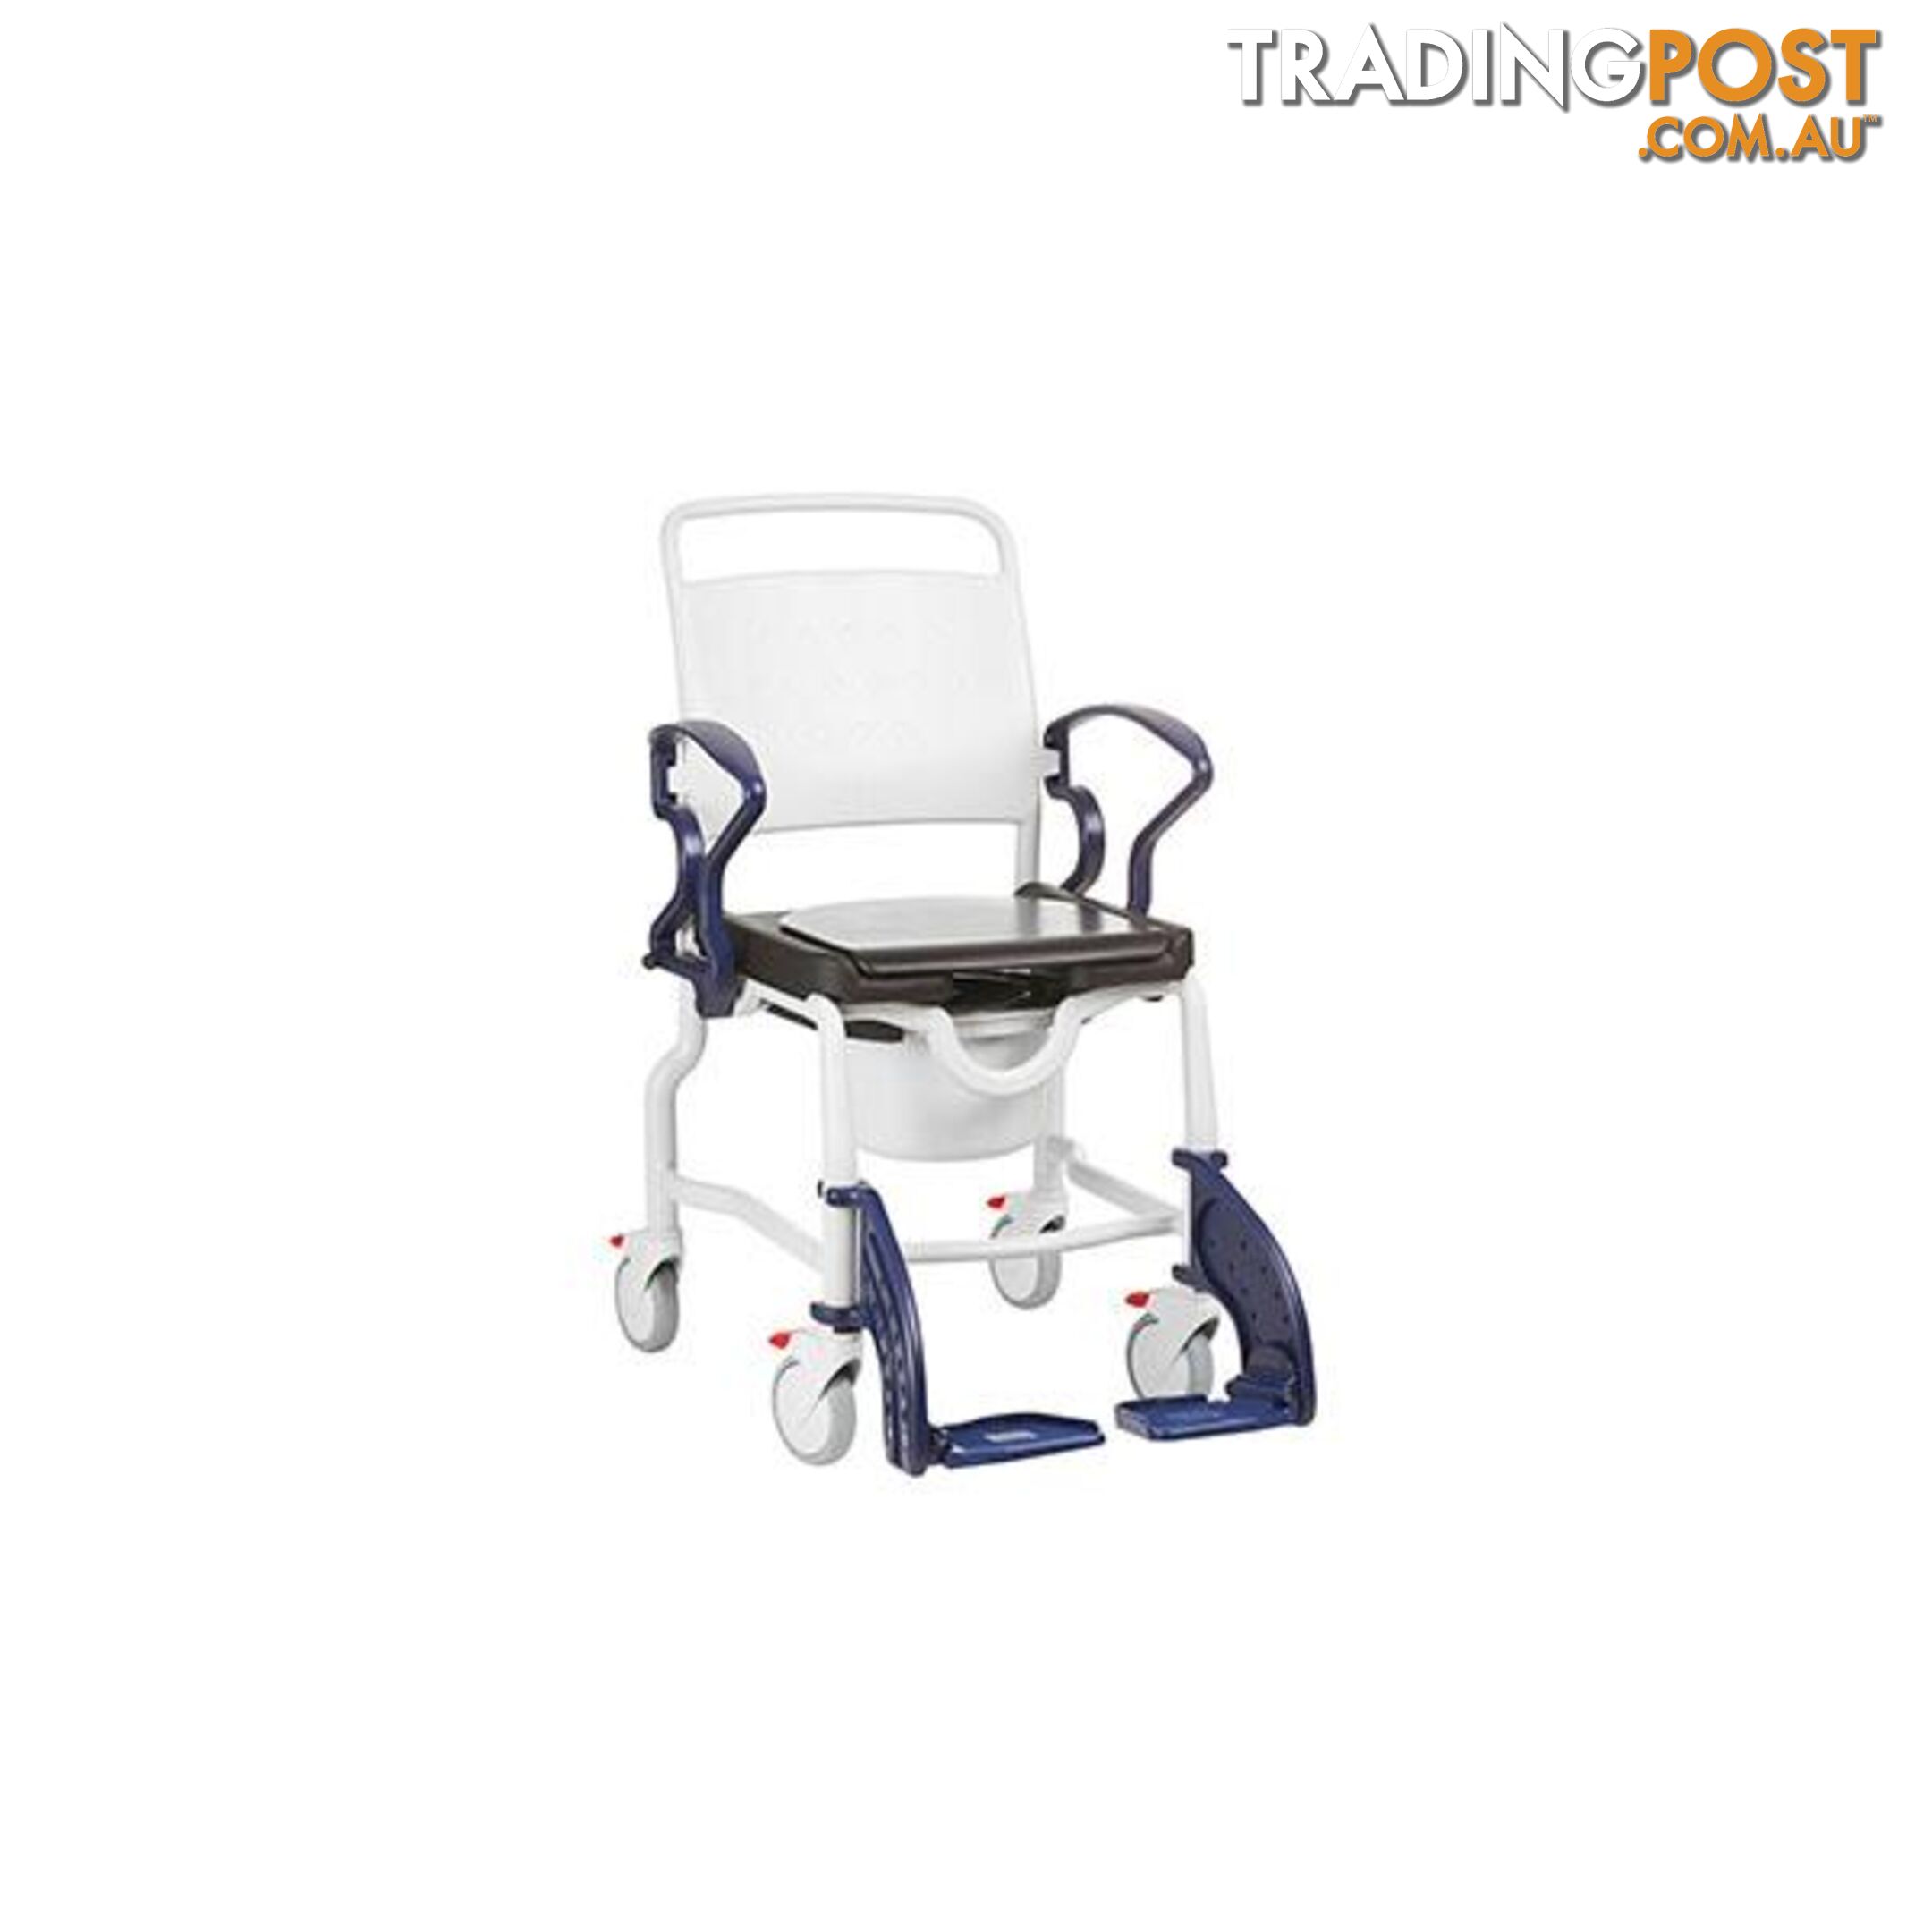 Rebotec Berlin Mobile Commode Chair - Commode Chair - 7427046220804